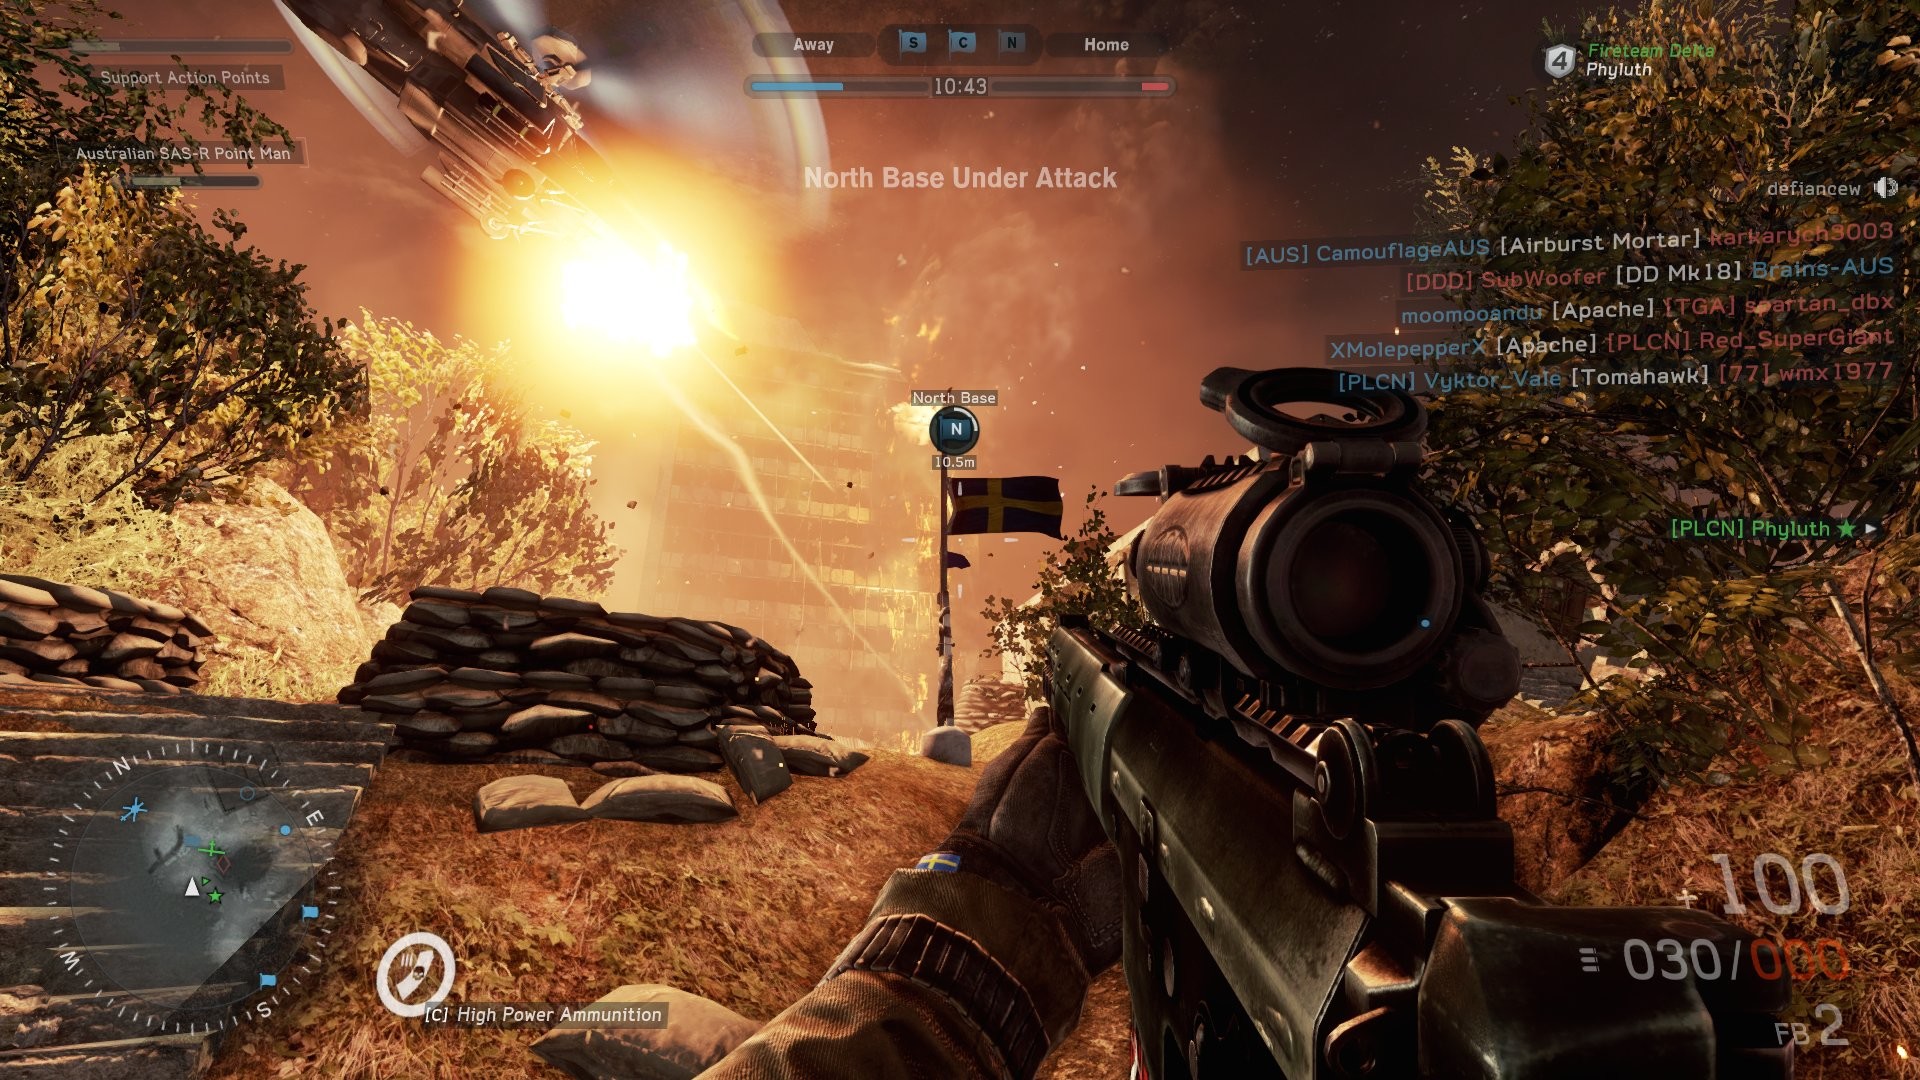 1920x1080 click to enlarge. Medal of Honor: Warfighter screenshot